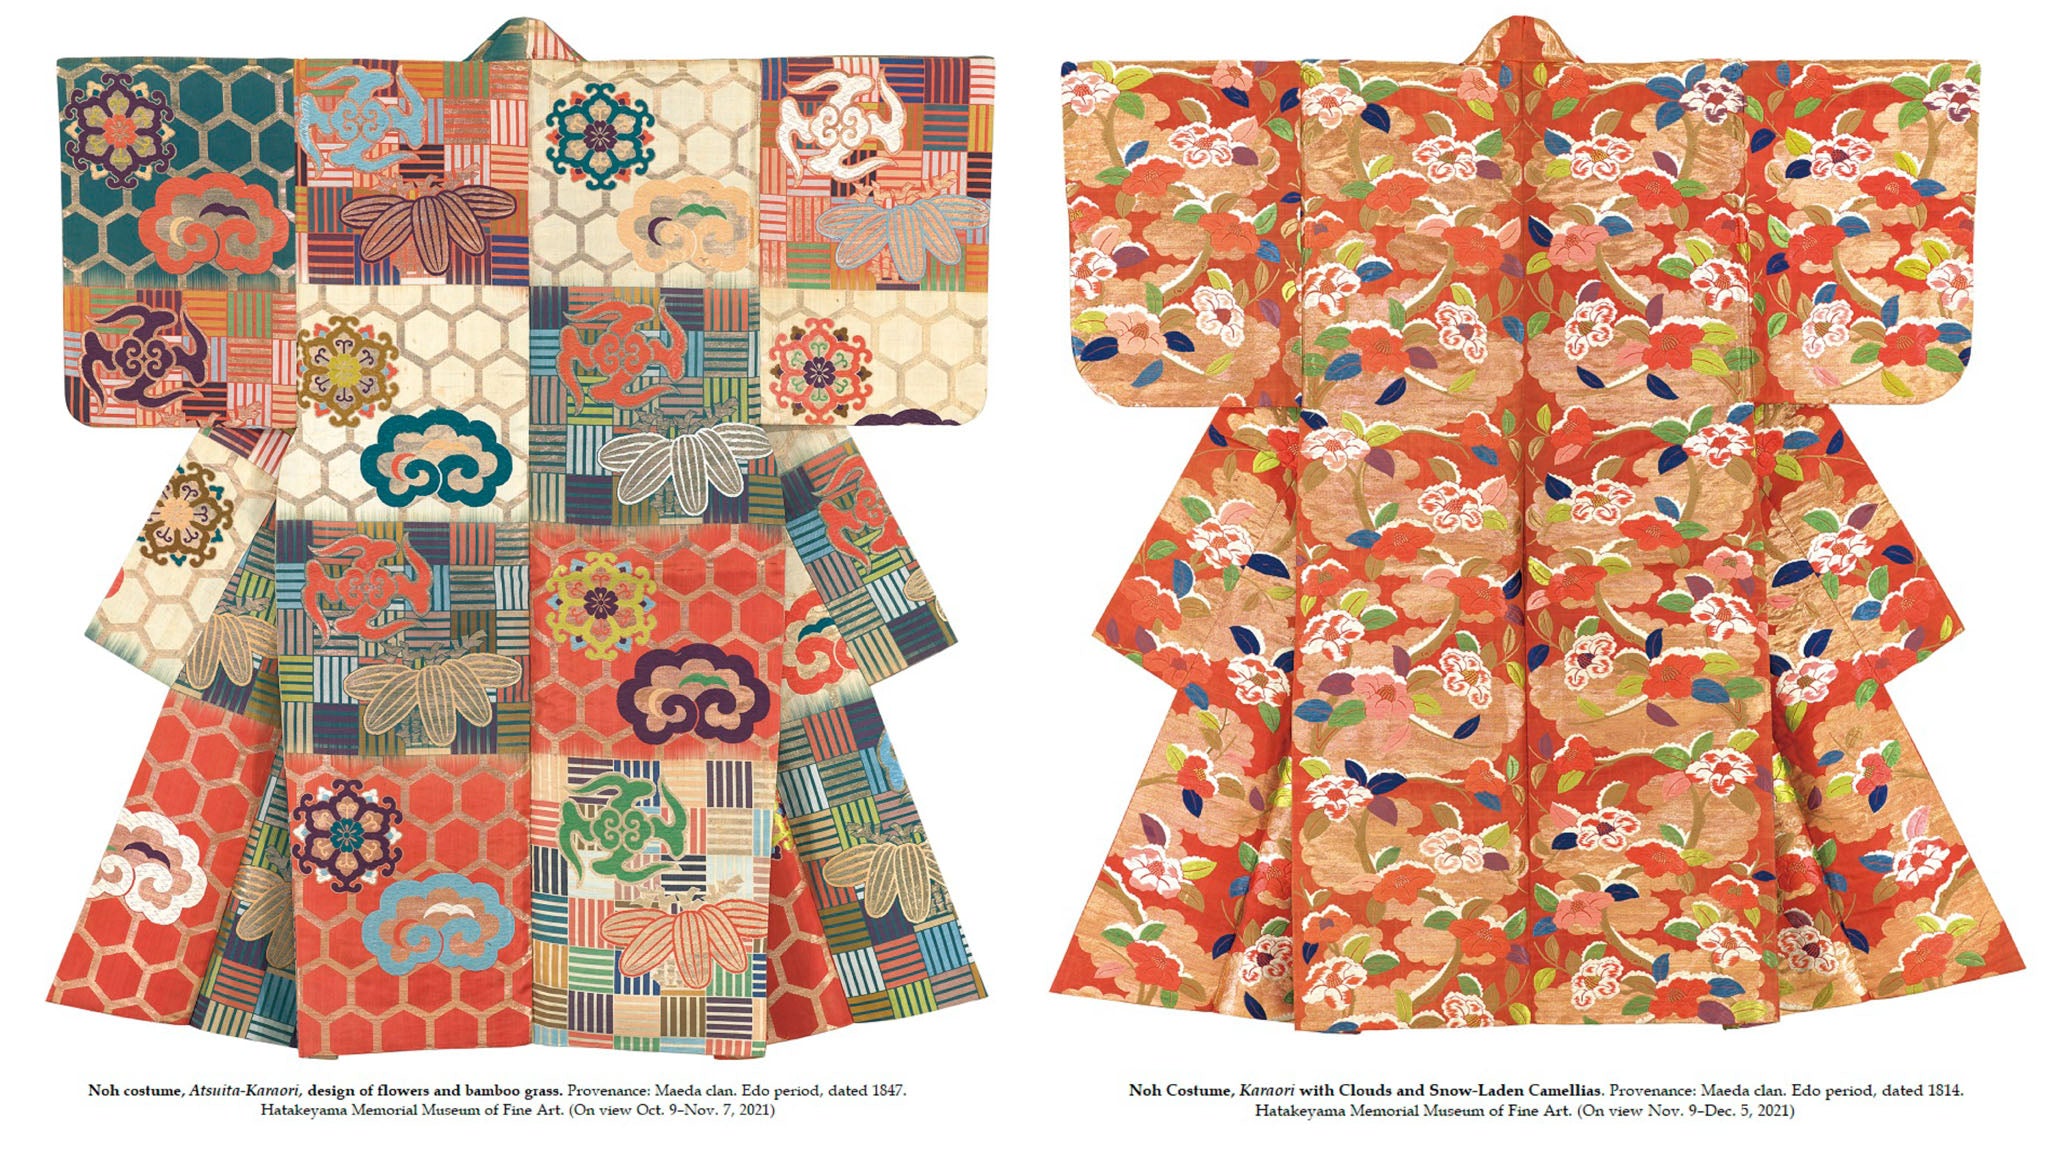 Kimono from the Hatakeyama Collection at Kyoto National Museum